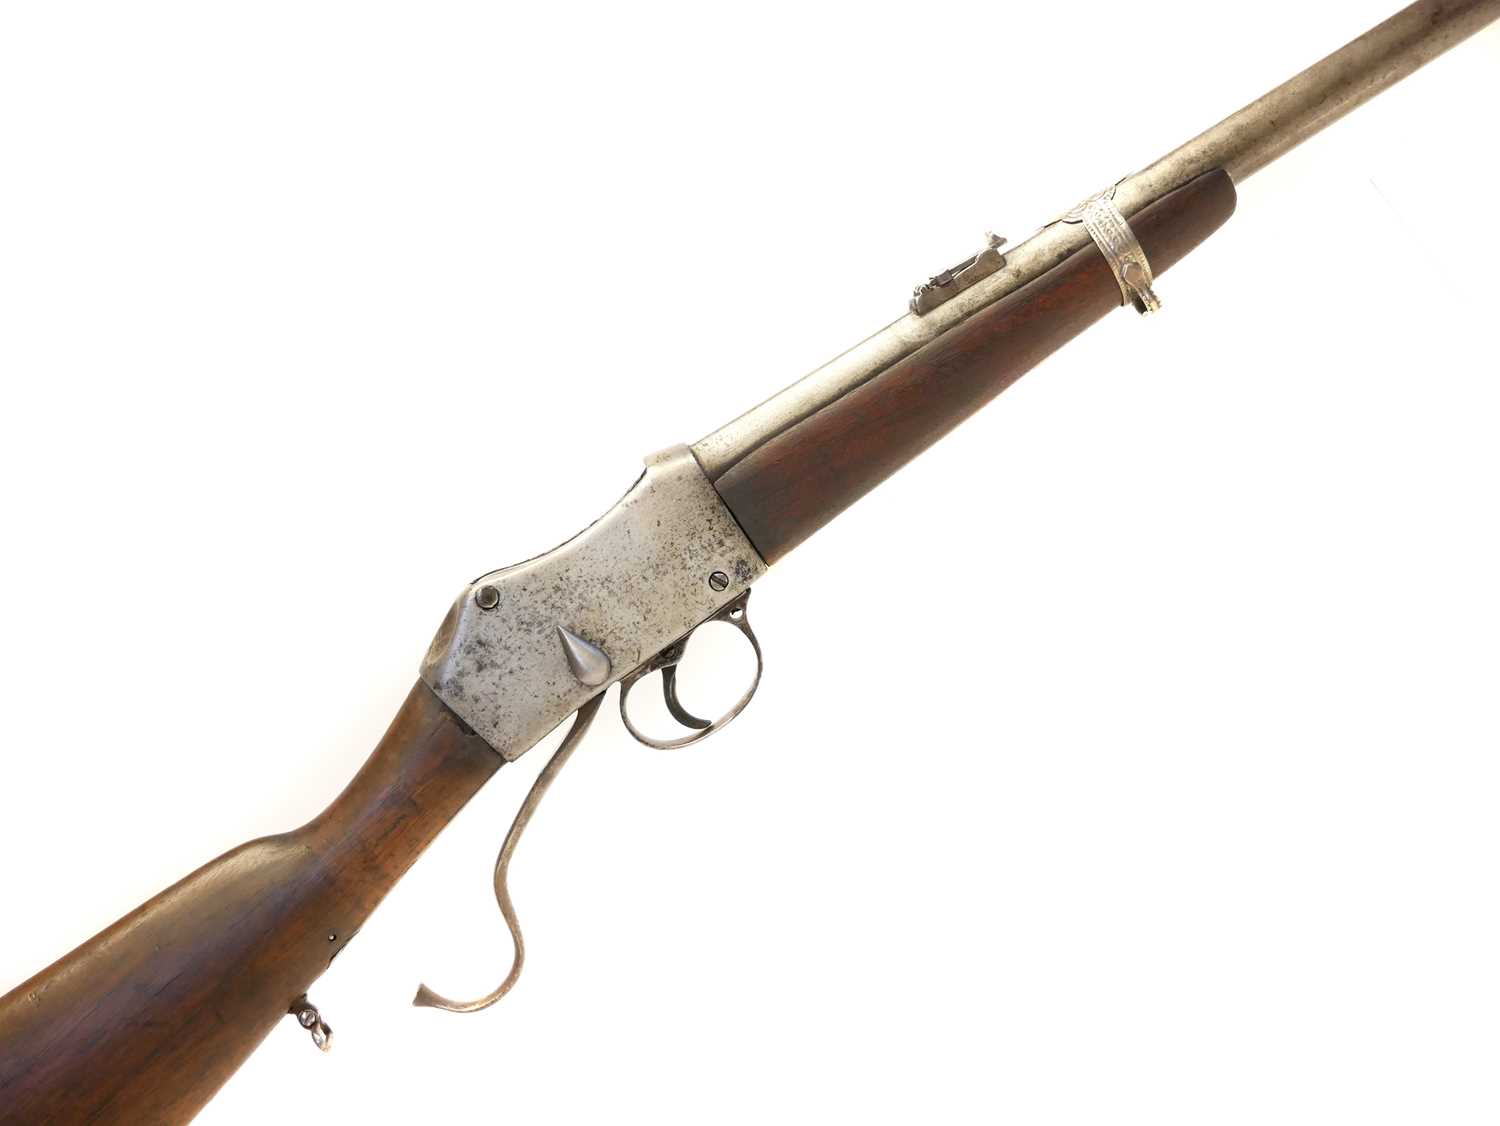 Sporterised Martini Henry .577/450 rifle, probably of Belgian origin reworked in India, 27inch